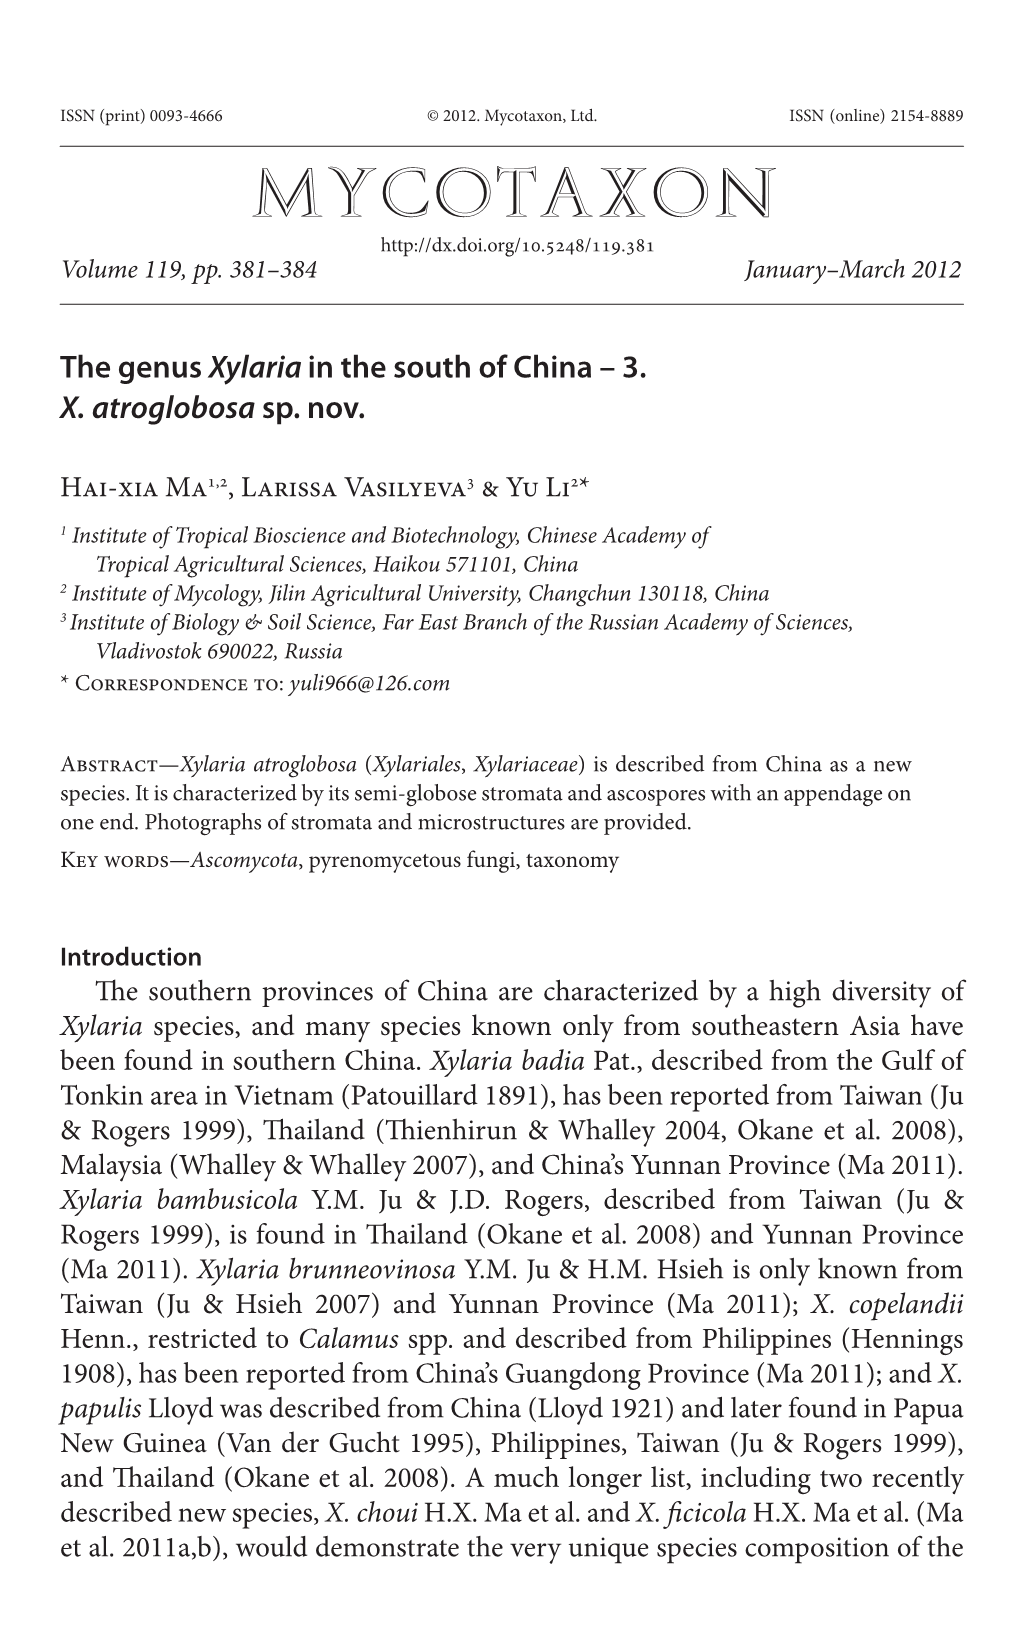 The Genus &lt;I&gt;Xylaria&lt;/I&gt; in the South of China ÂŒ 3. &lt;I